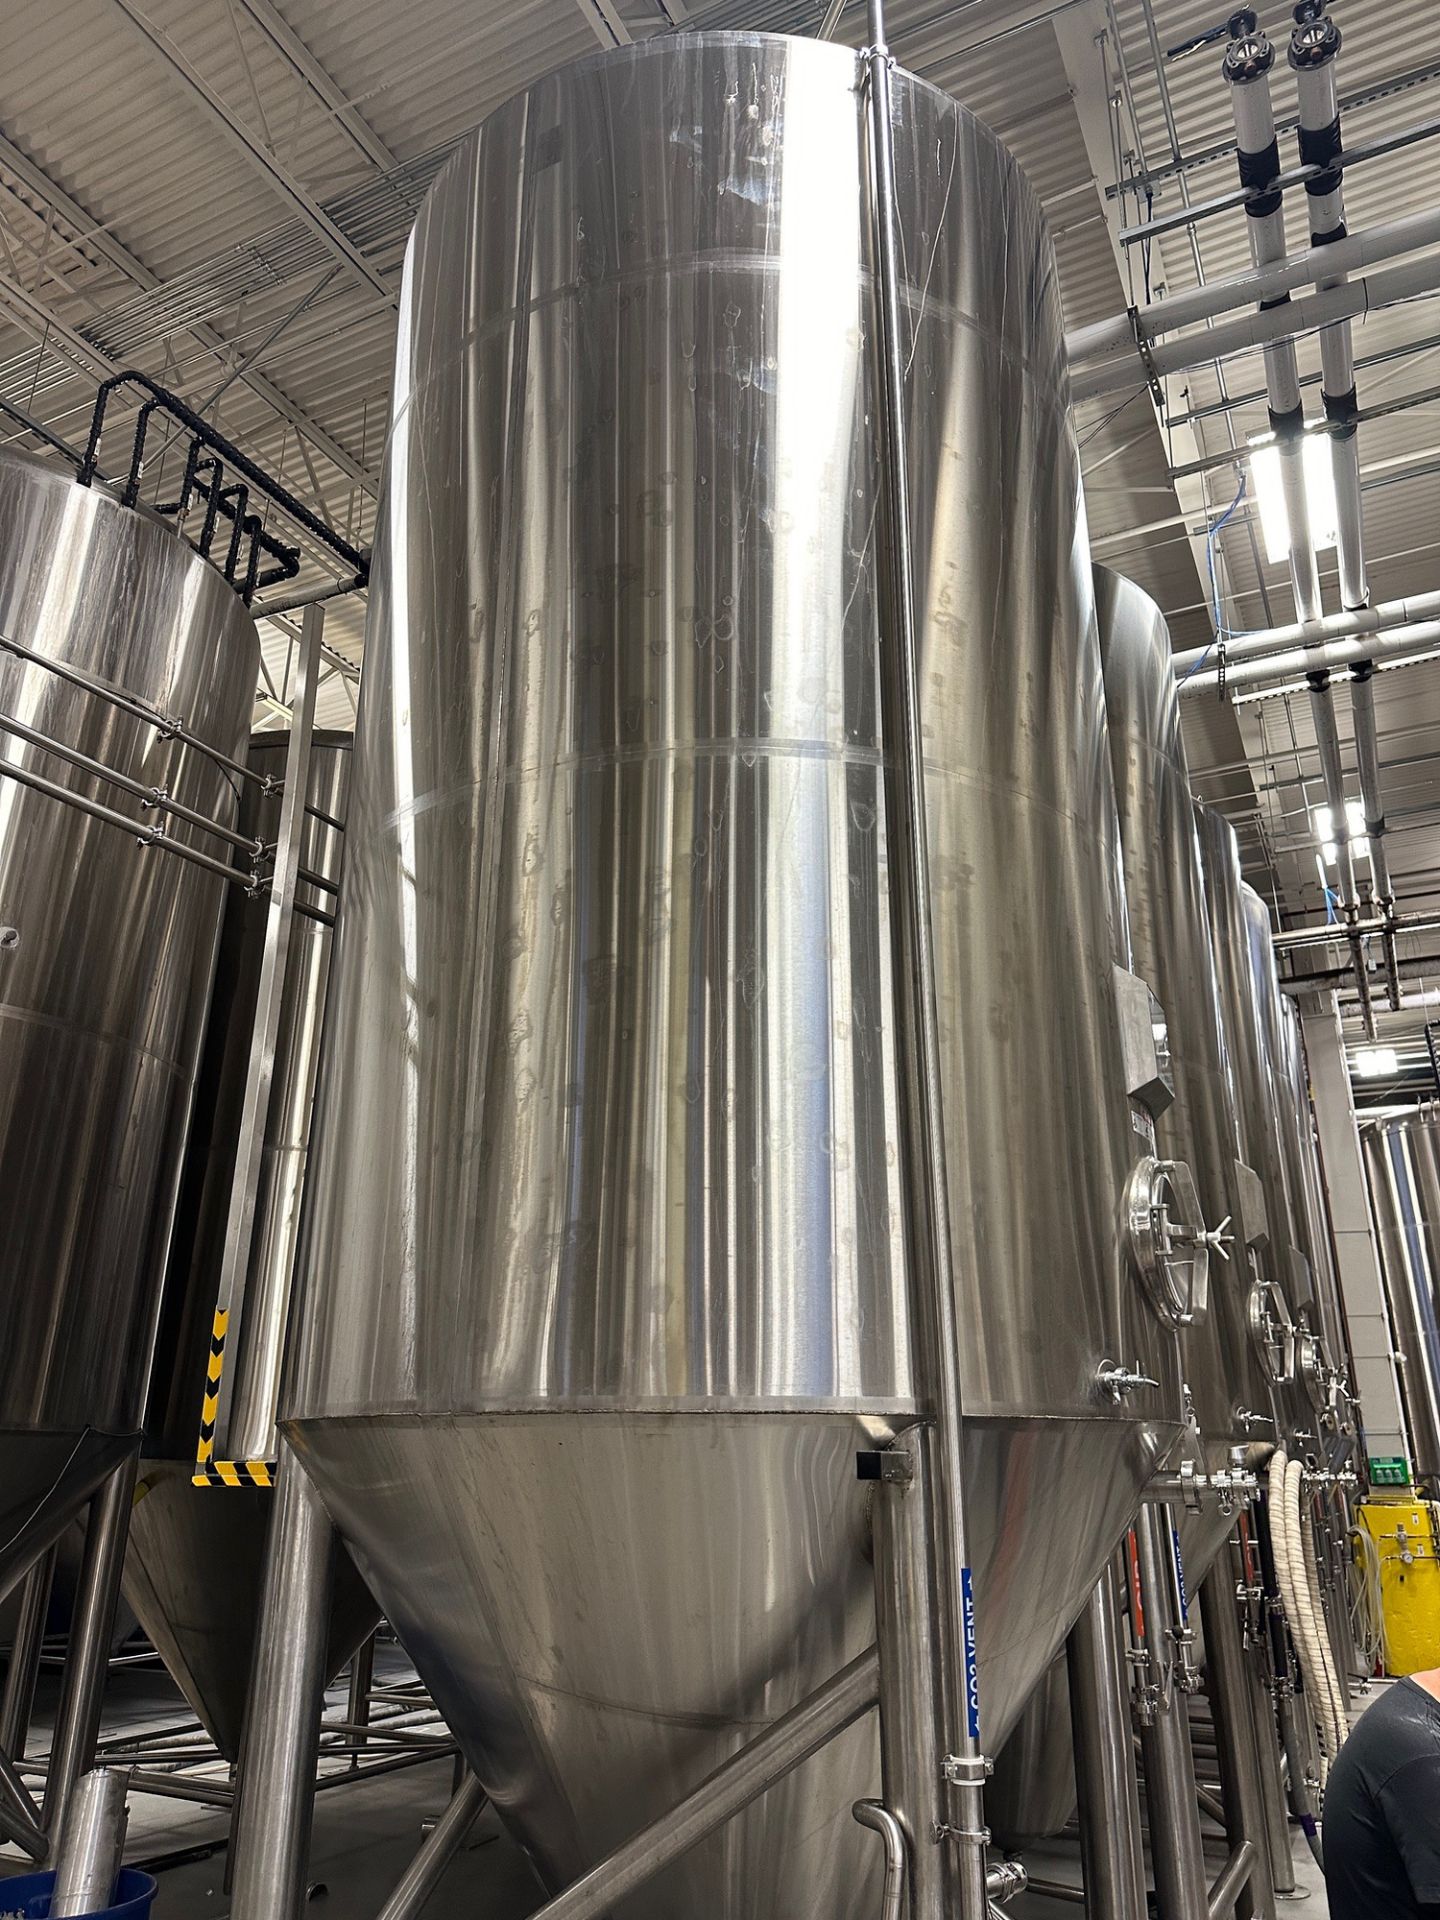 (1 of 8) 2020 Marks 132 BBL FV / 175 BBL or 5400 Gal Max Capacity Fermentation Tank | Rig Fee $2620 - Image 3 of 5